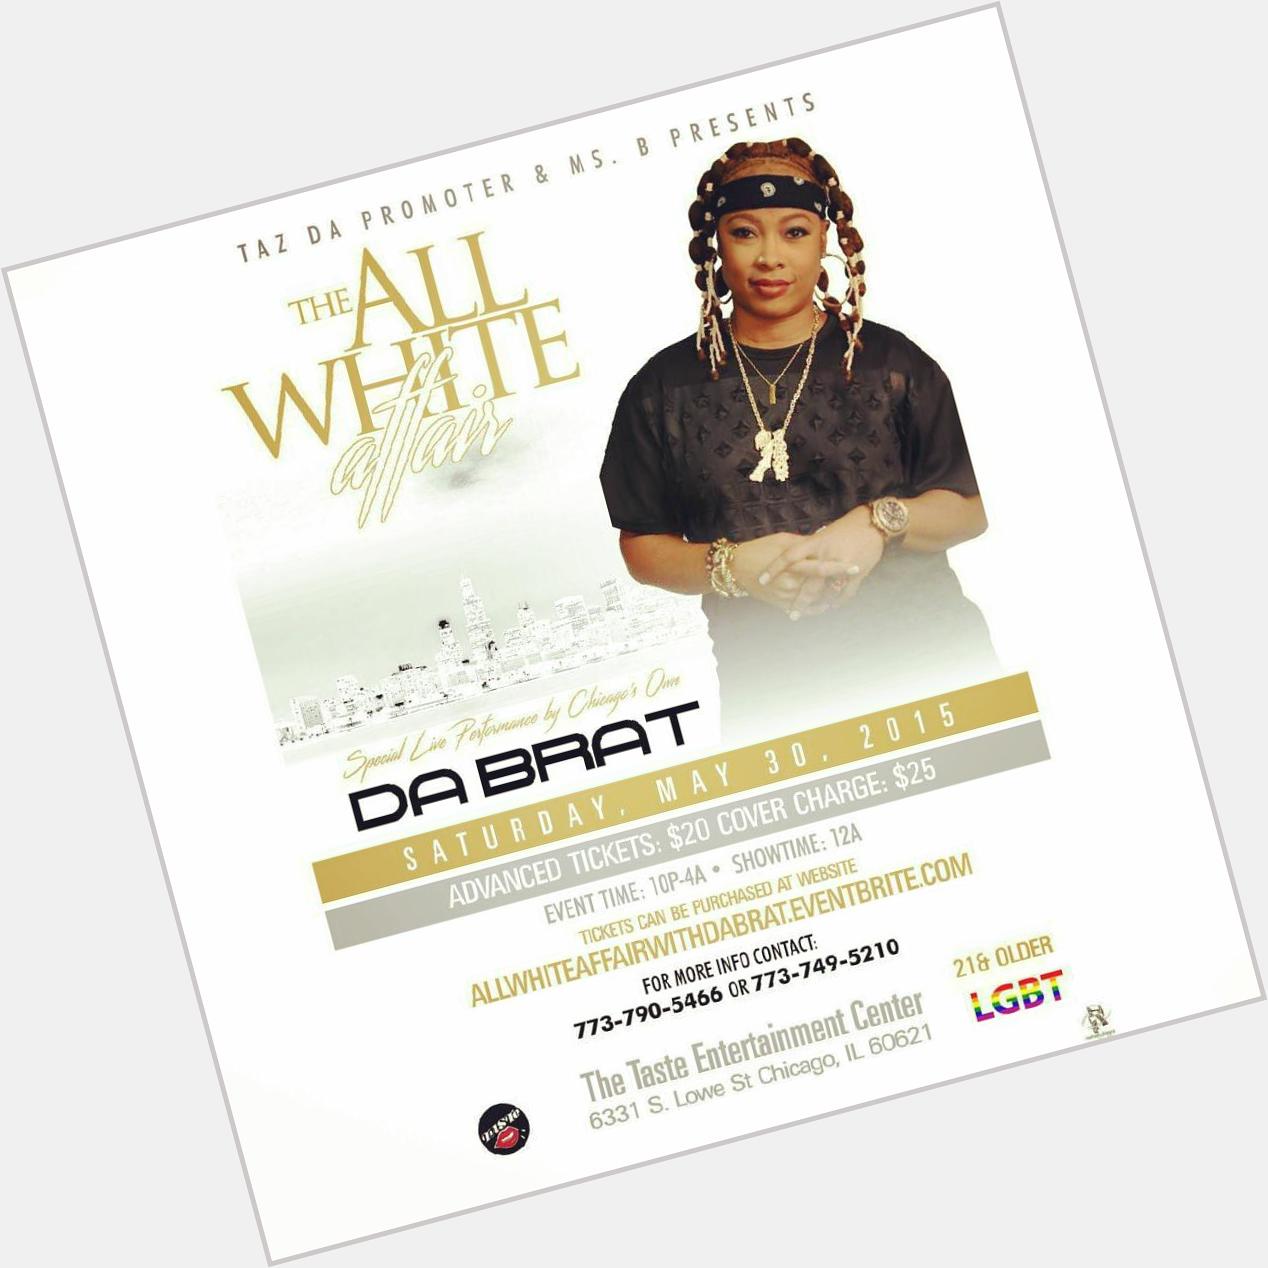 Happy bday aka Da Brat can\t wait to u turn up w/ us in Chicago on Sat. May 30th!!! 